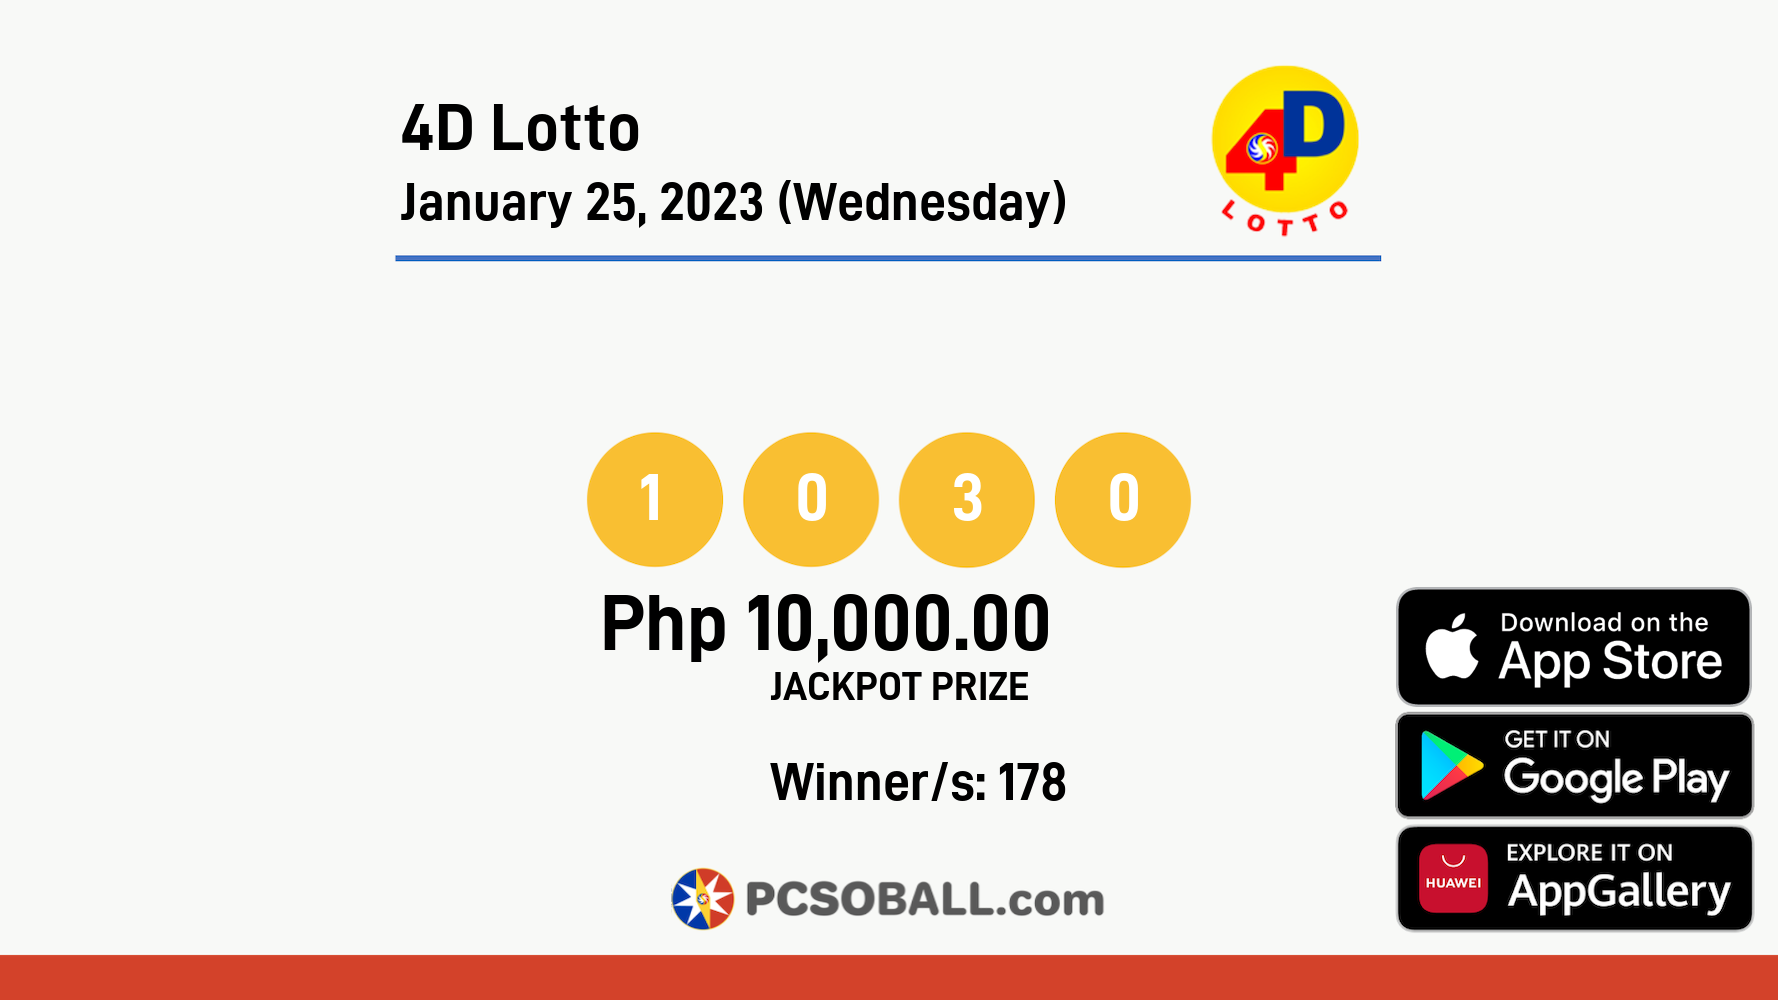 4D Lotto January 25, 2023 (Wednesday) Result